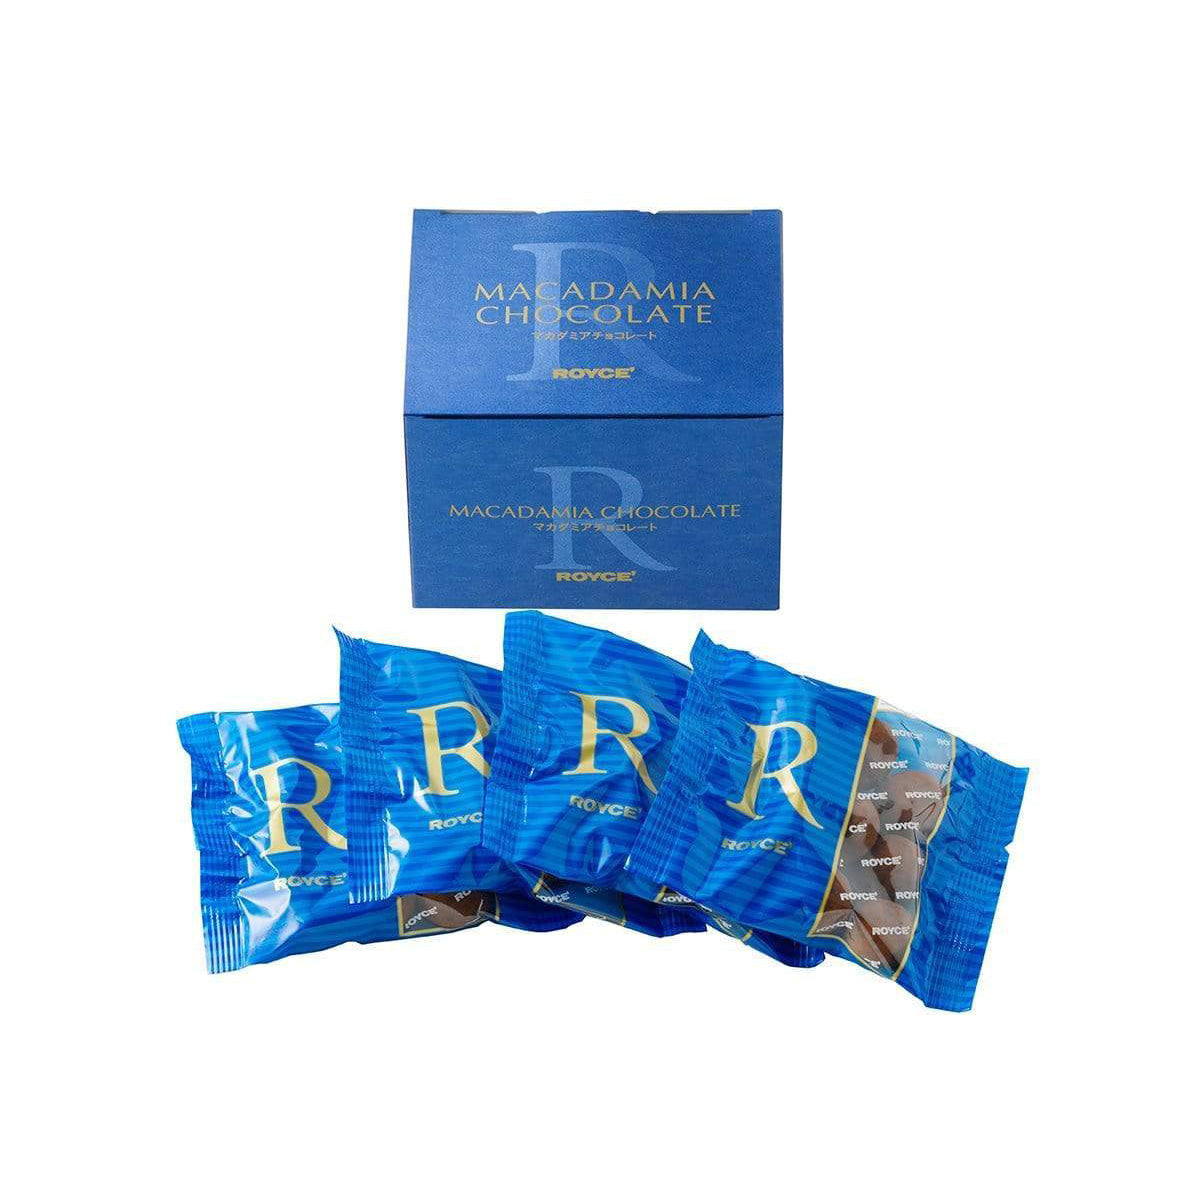 ROYCE' Chocolate - Macadamia Chocolate - Image shows a blue box with the words Macadamia Chocolate ROYCE' on top and bottom. Below image shows four packets with blue stripes and the words R ROYCE' in gold color.